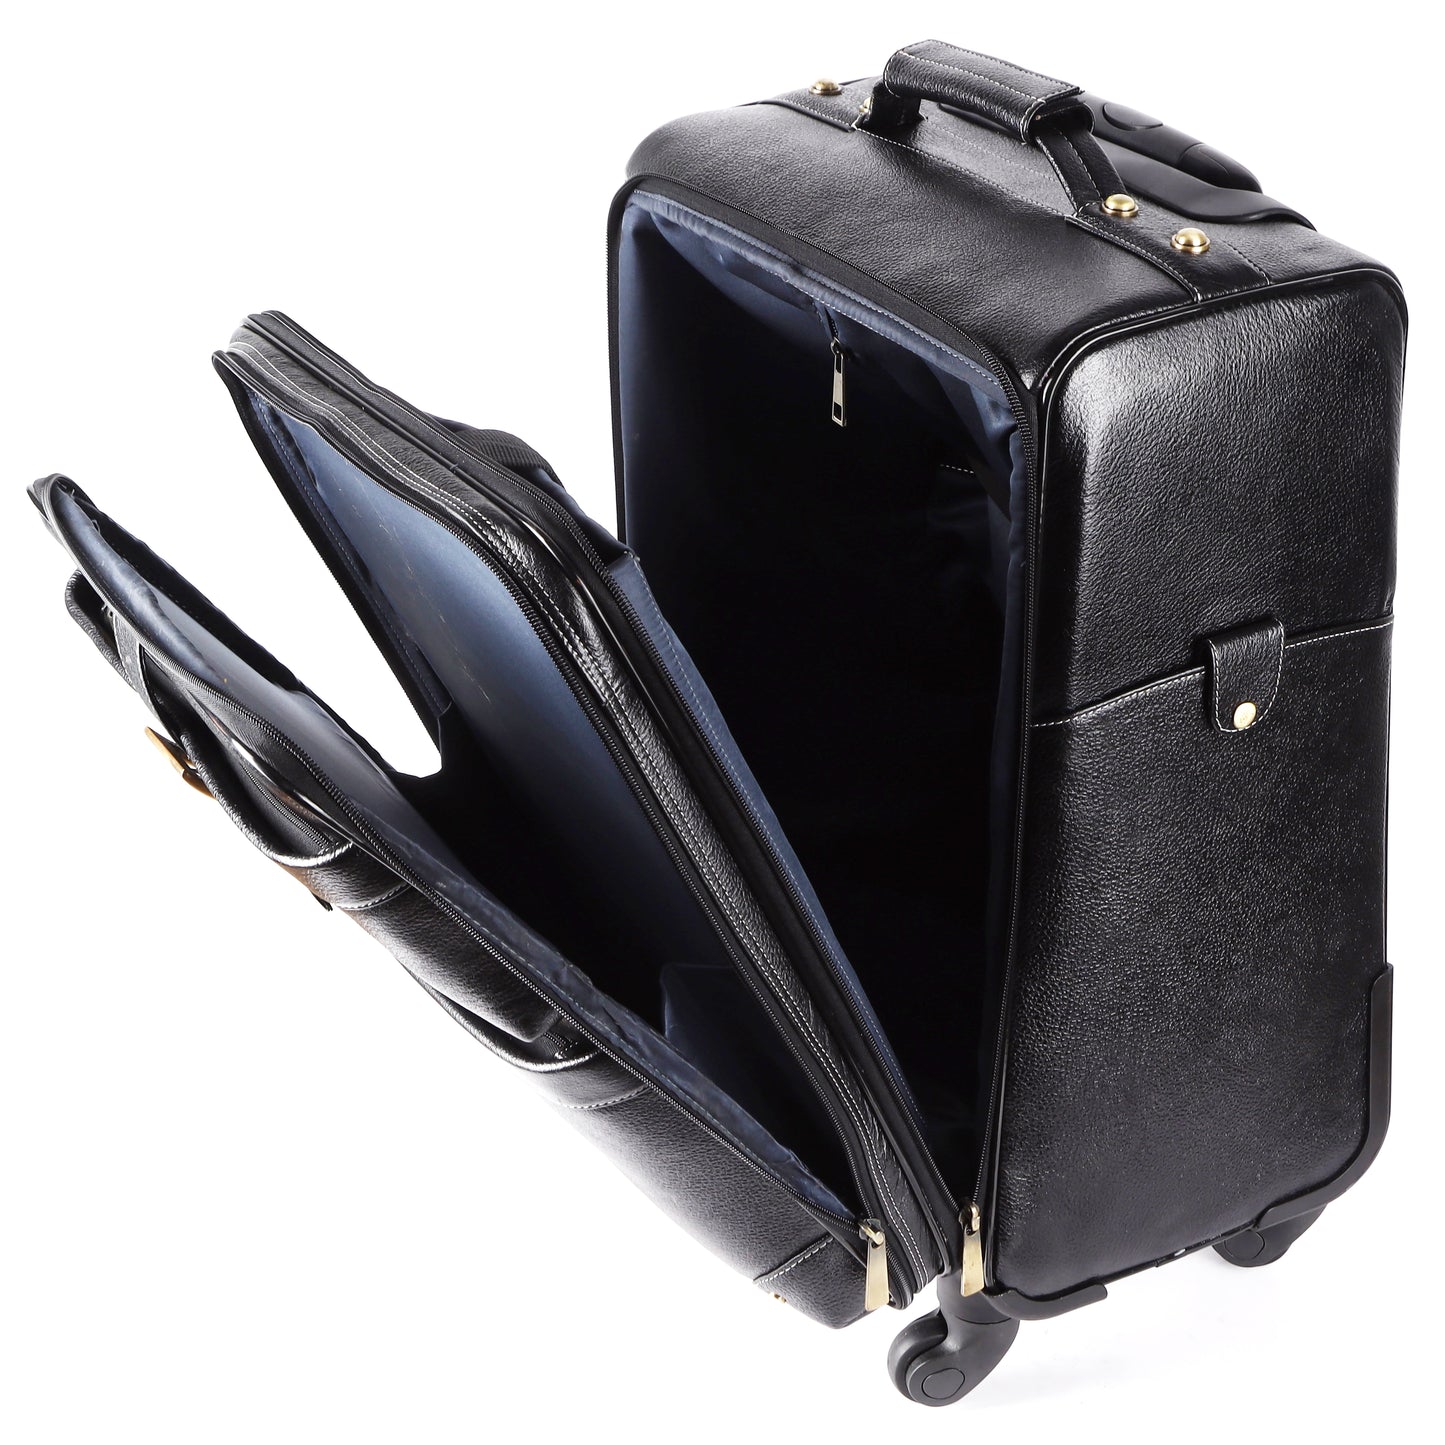 Black Leather Trolley Bag Airport Cabin Bag Leather Weekender Leather Luggage with Wheels Gift For Him